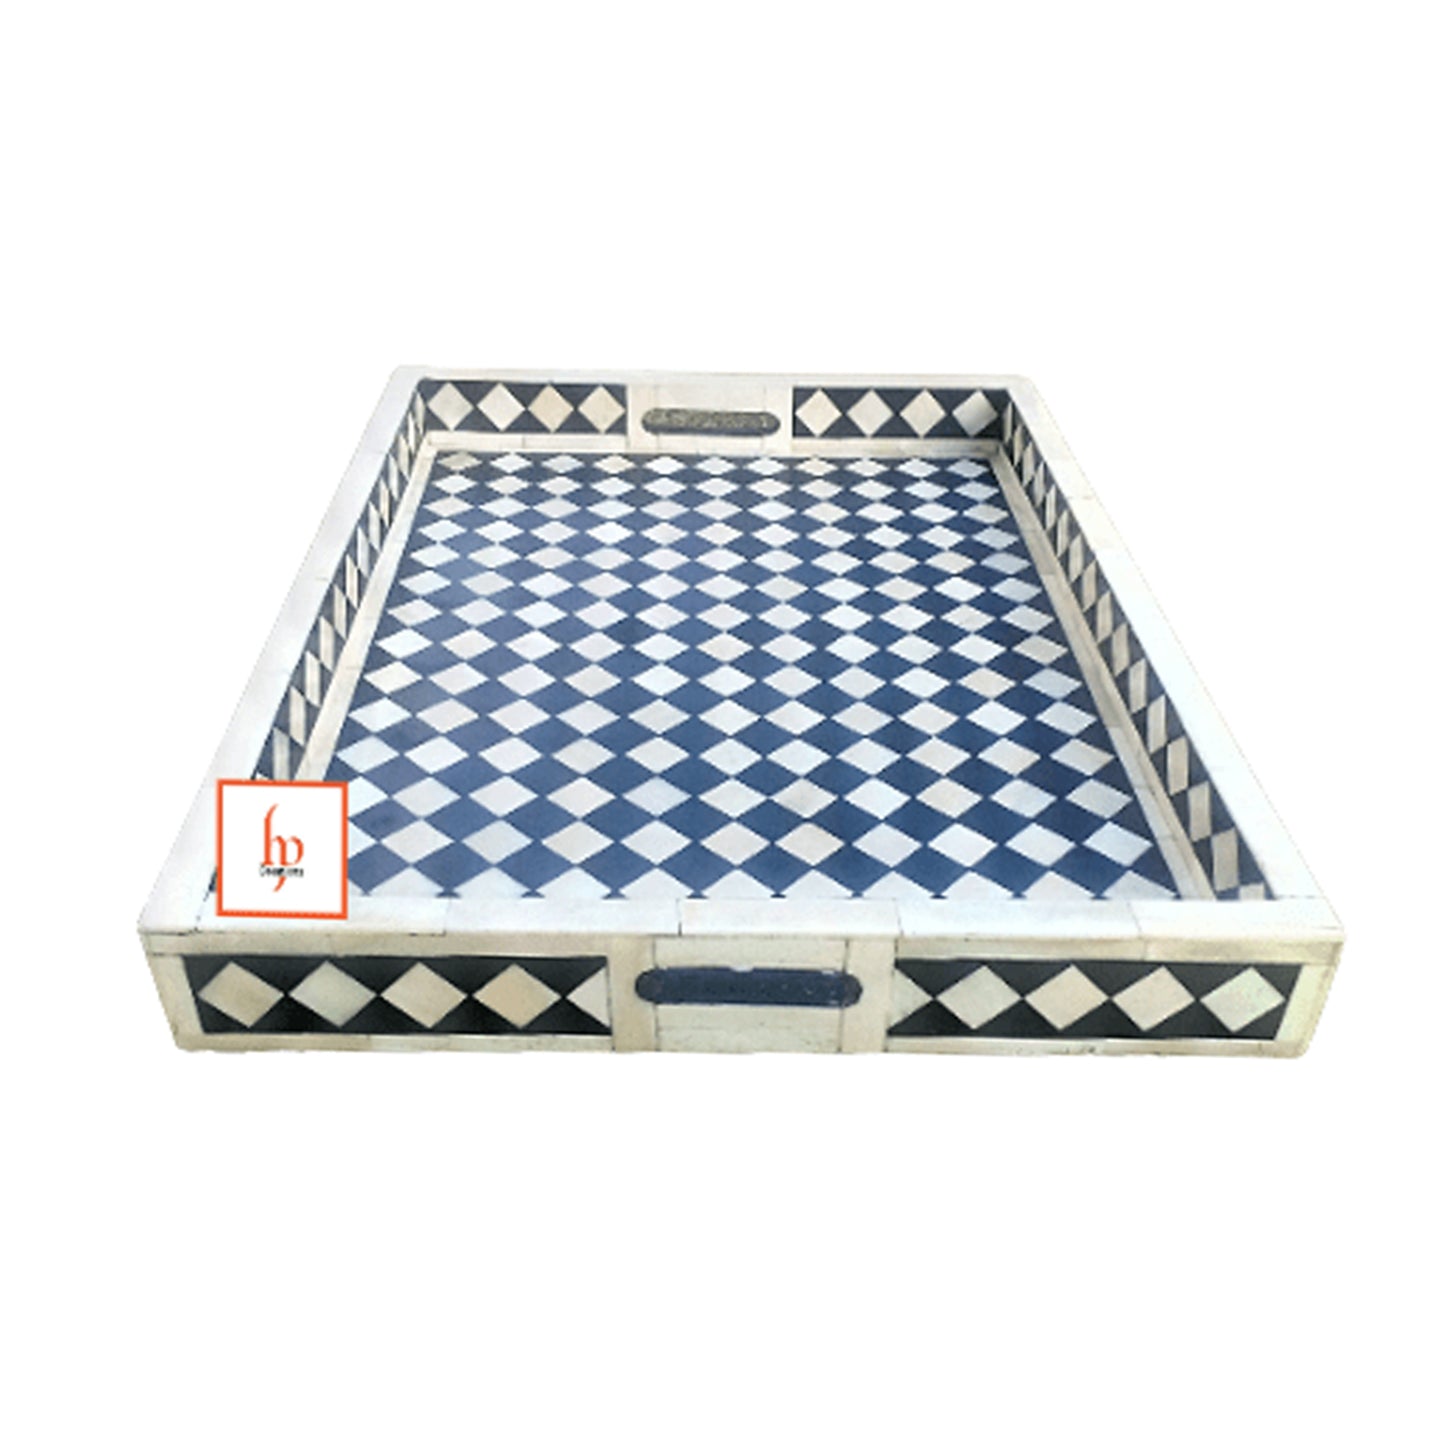 Beautifully Handcrafted Bone Inlay Decorative Serving Tray a Perfect Gift for Loved Ones